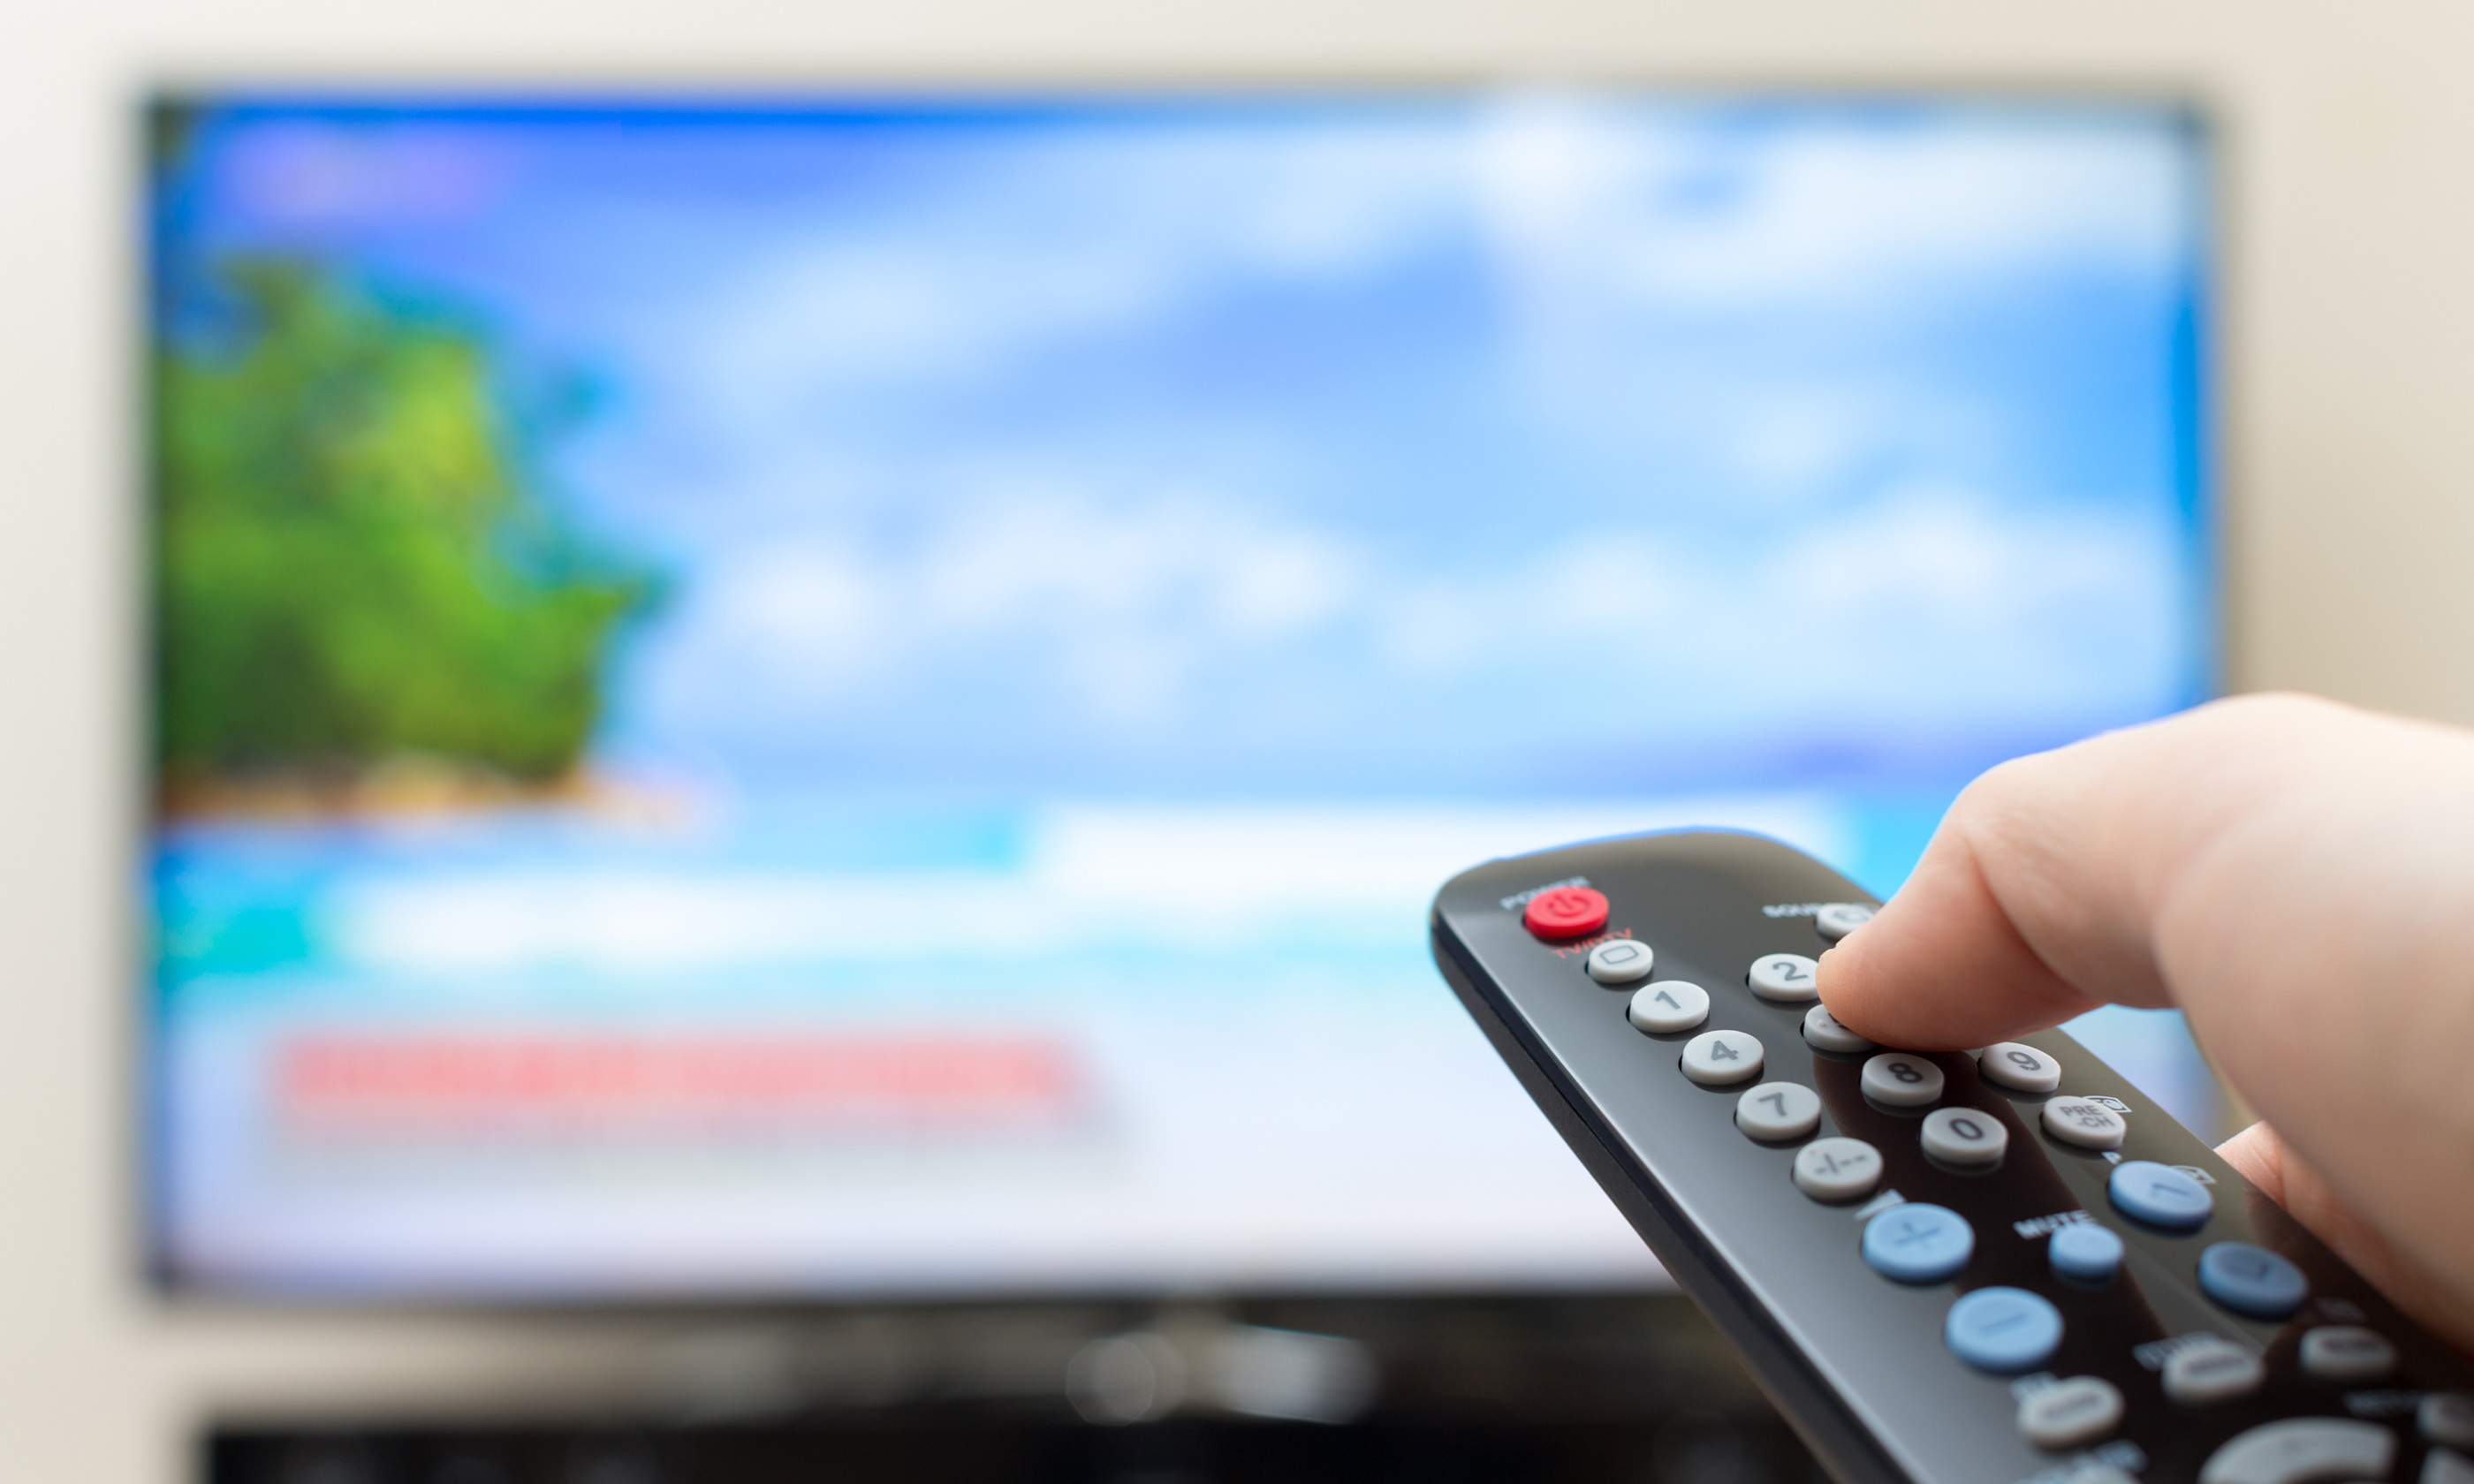 TV and remote (Shutterstock: see main credit below)